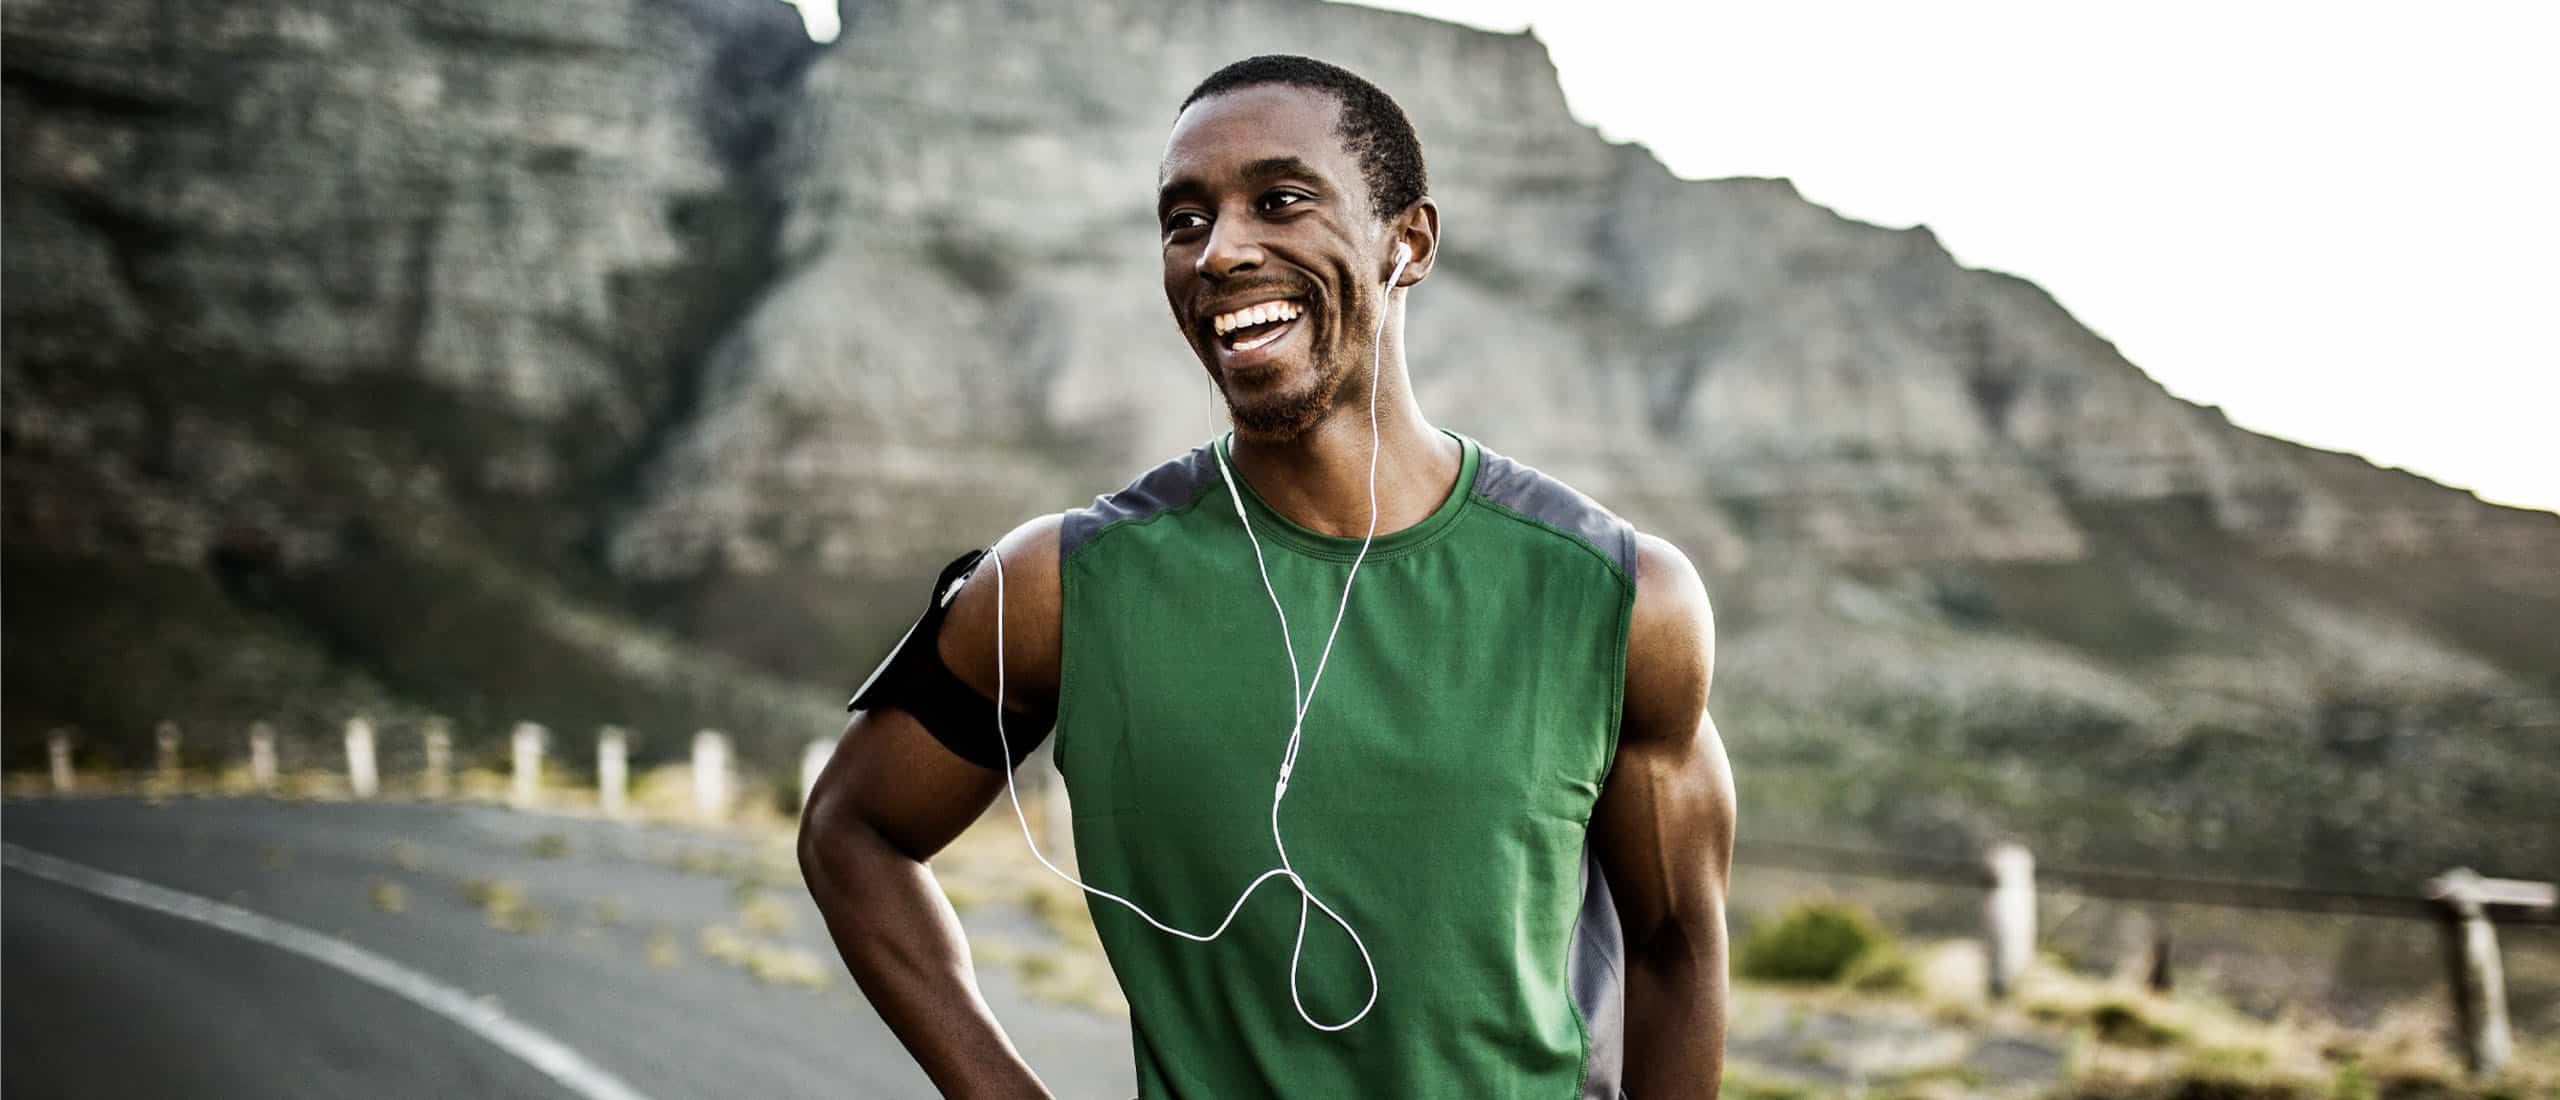 Man smiling after long run in the mountains